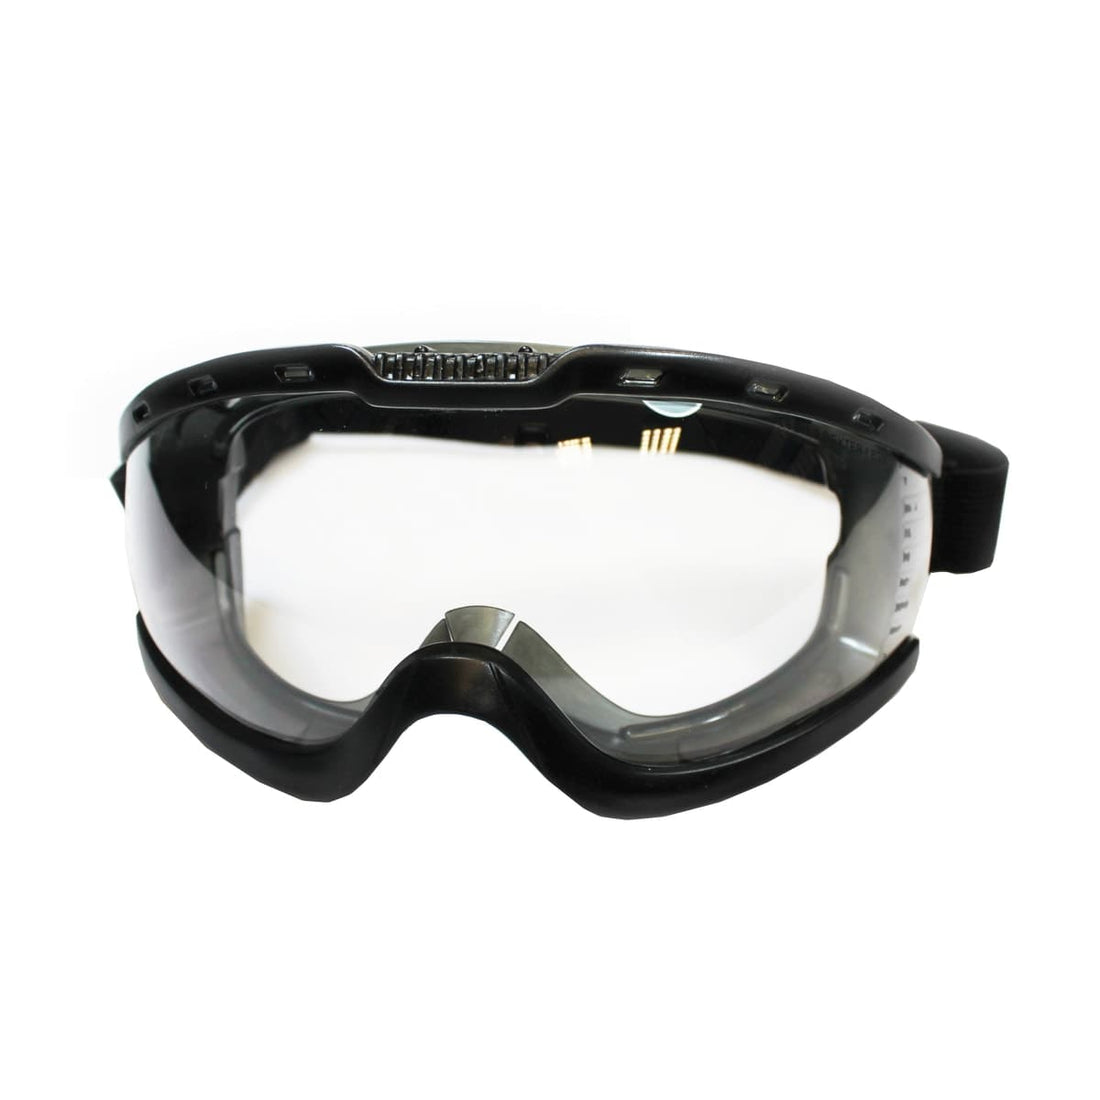 DEXTER ANTI-FOG GOGGLES WITH ELASTIC BAND - best price from Maltashopper.com BR400001195